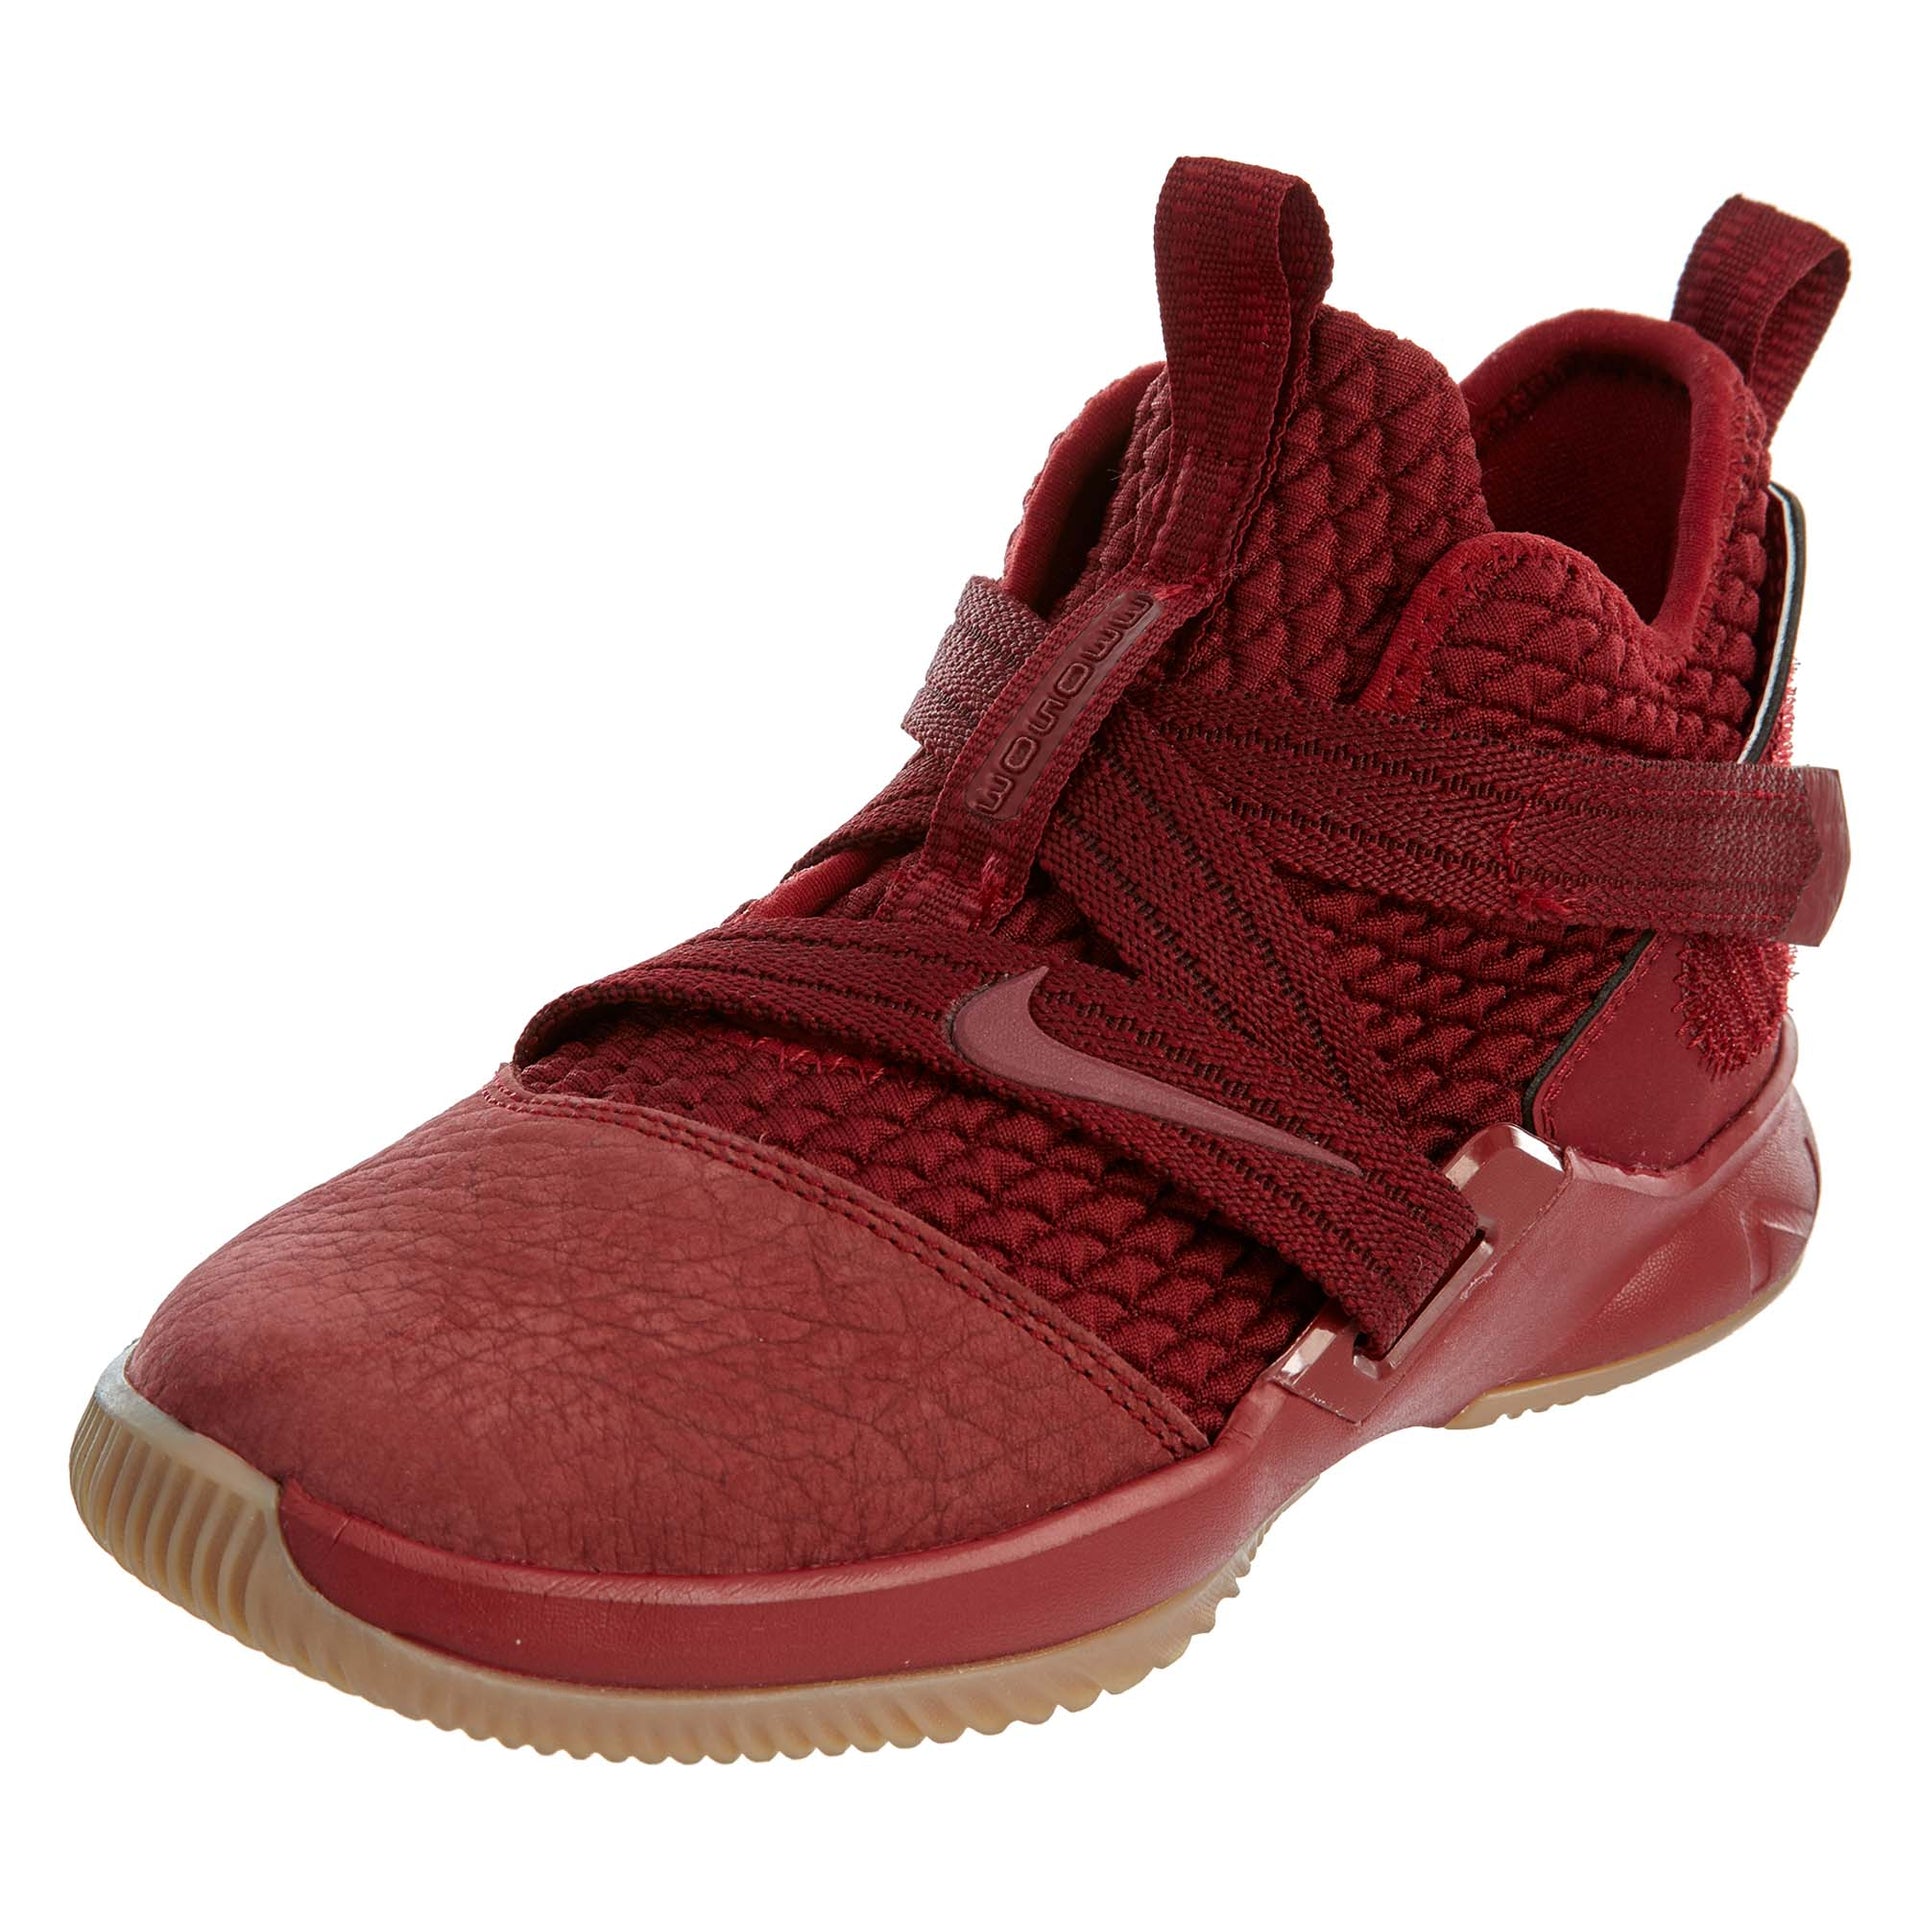 Nike Lebron Soldier 12 SFG Team Red Boys / Girls Style :AO2912